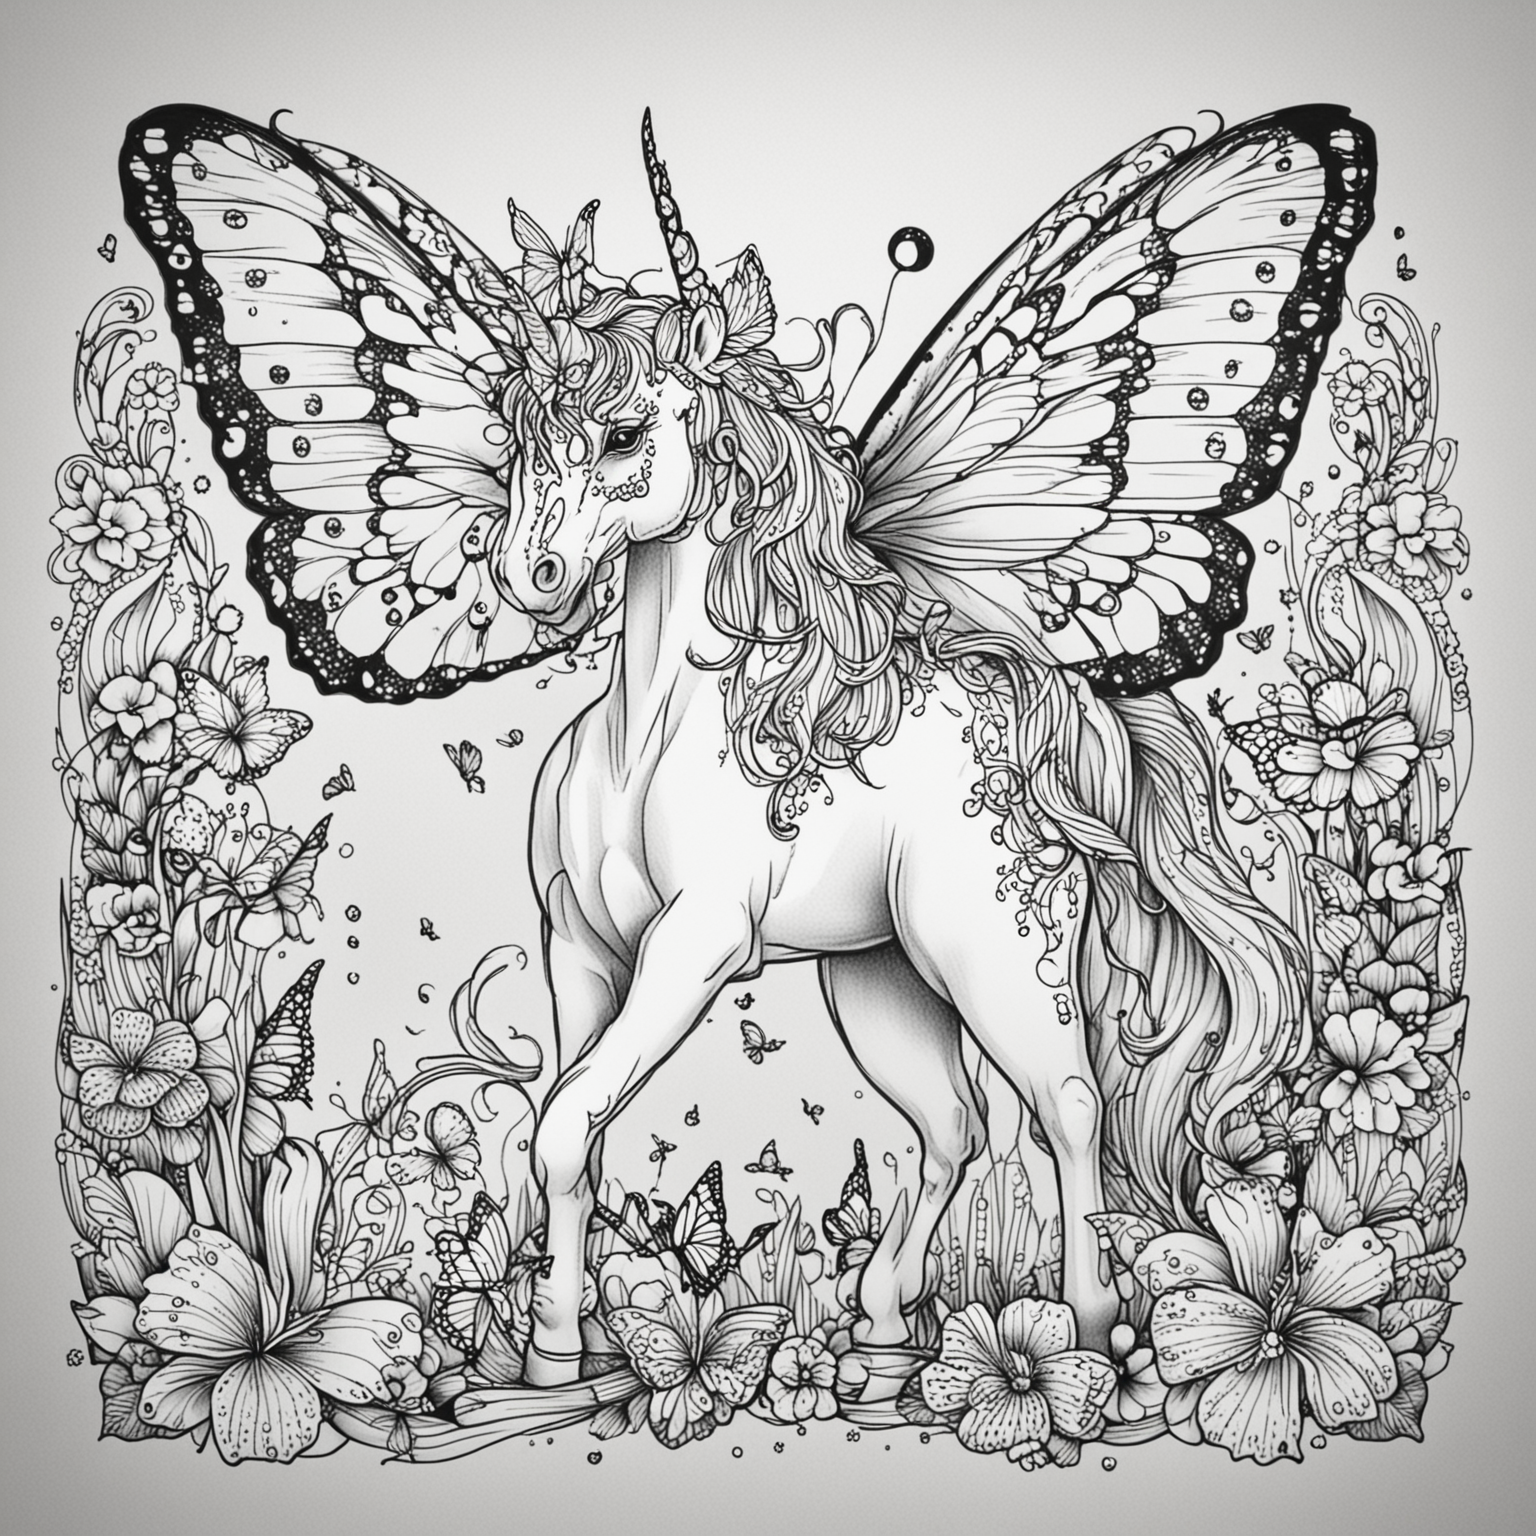 Butterfly Unicorn Coloring Page Large Areas for Creative Expression